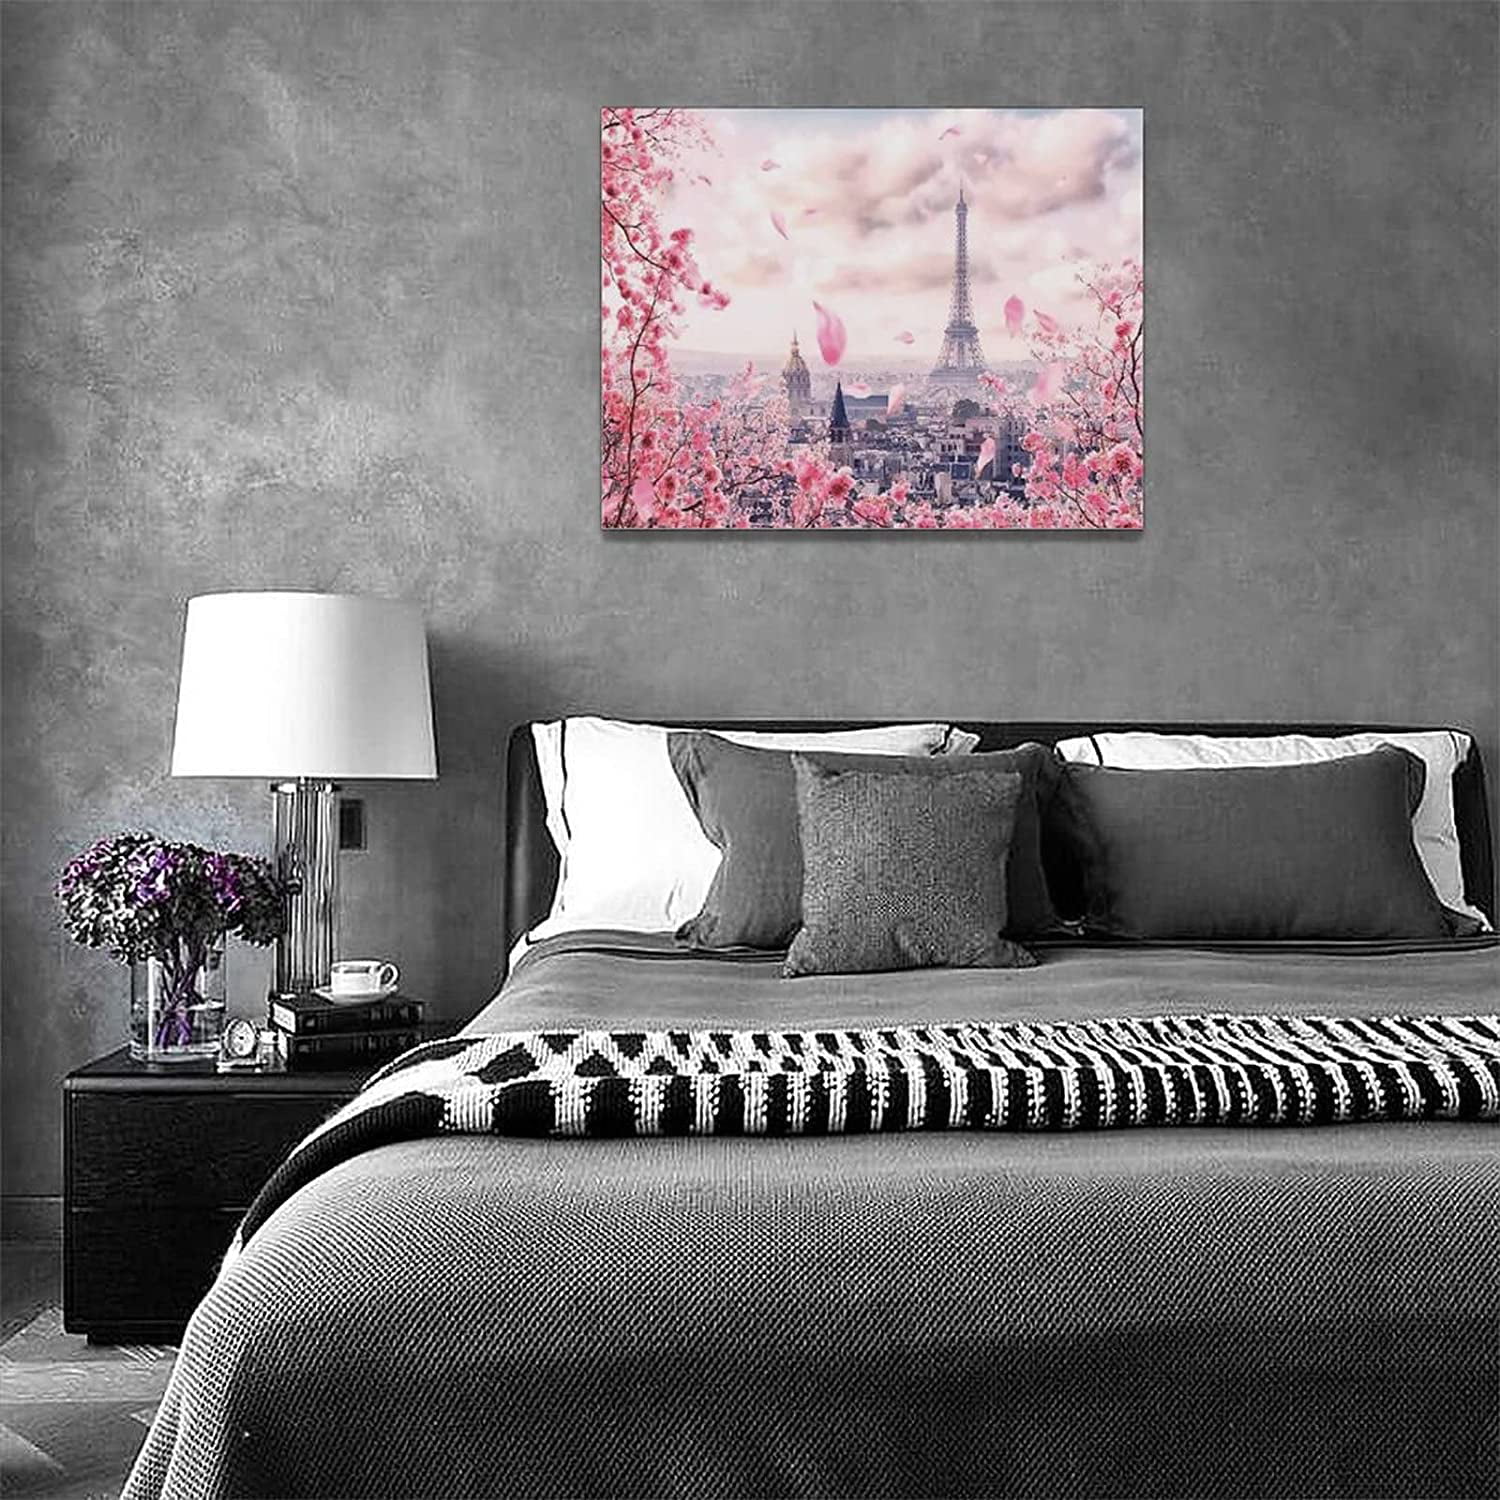 Home Bedroom Living Room Eiffel Tower Decoration Vinyl Cherry Blossom Wall  Decal